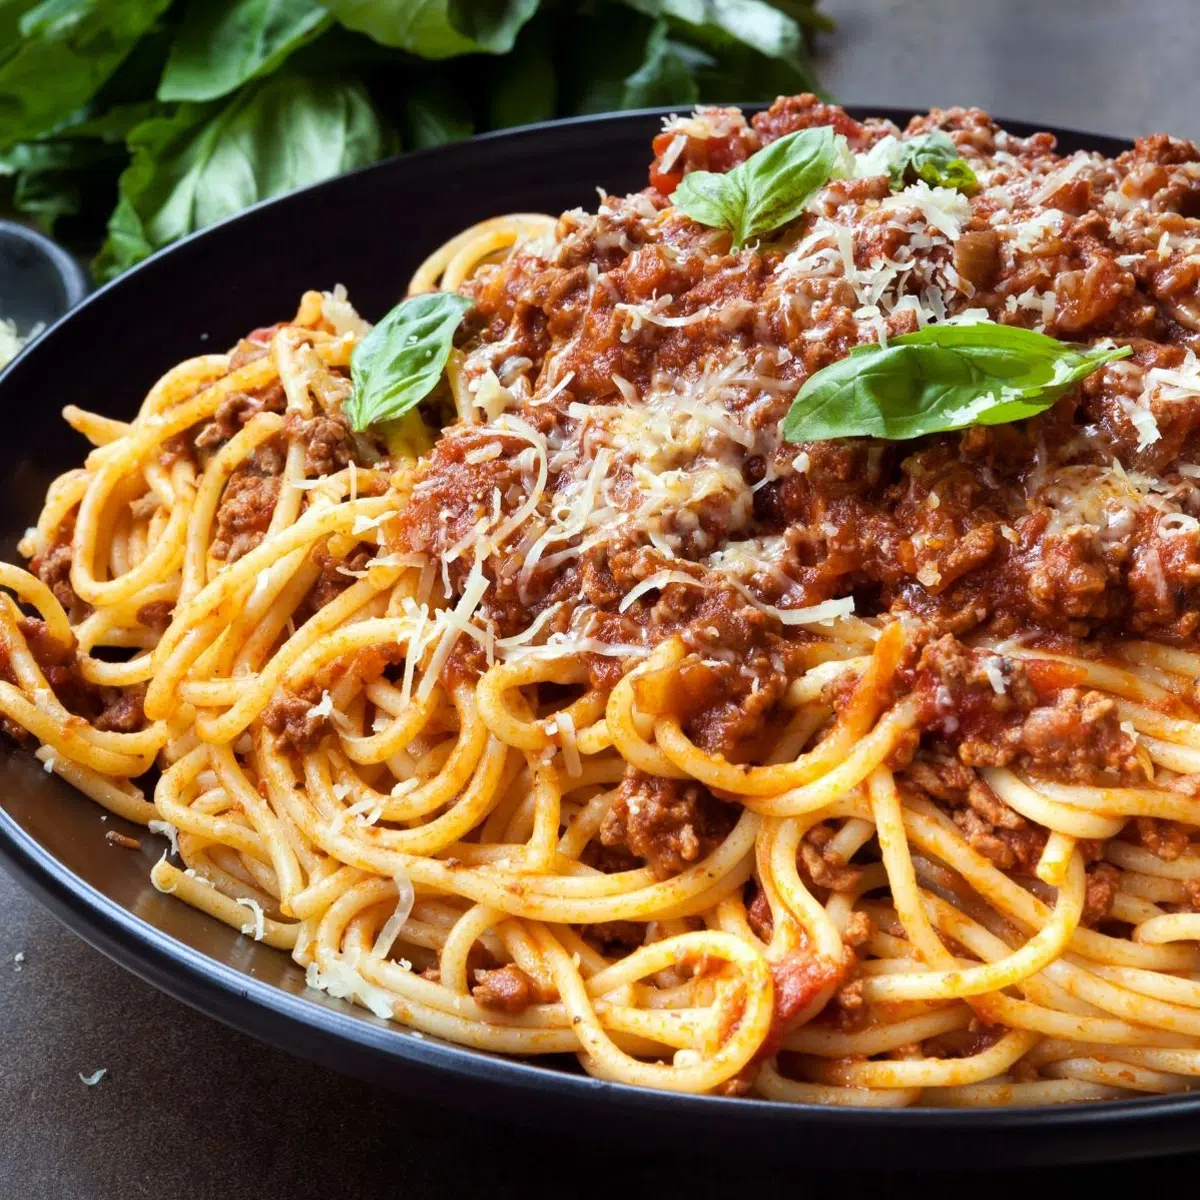 Spaghetti bolognese on black plate with Parmesan and basil garnish.